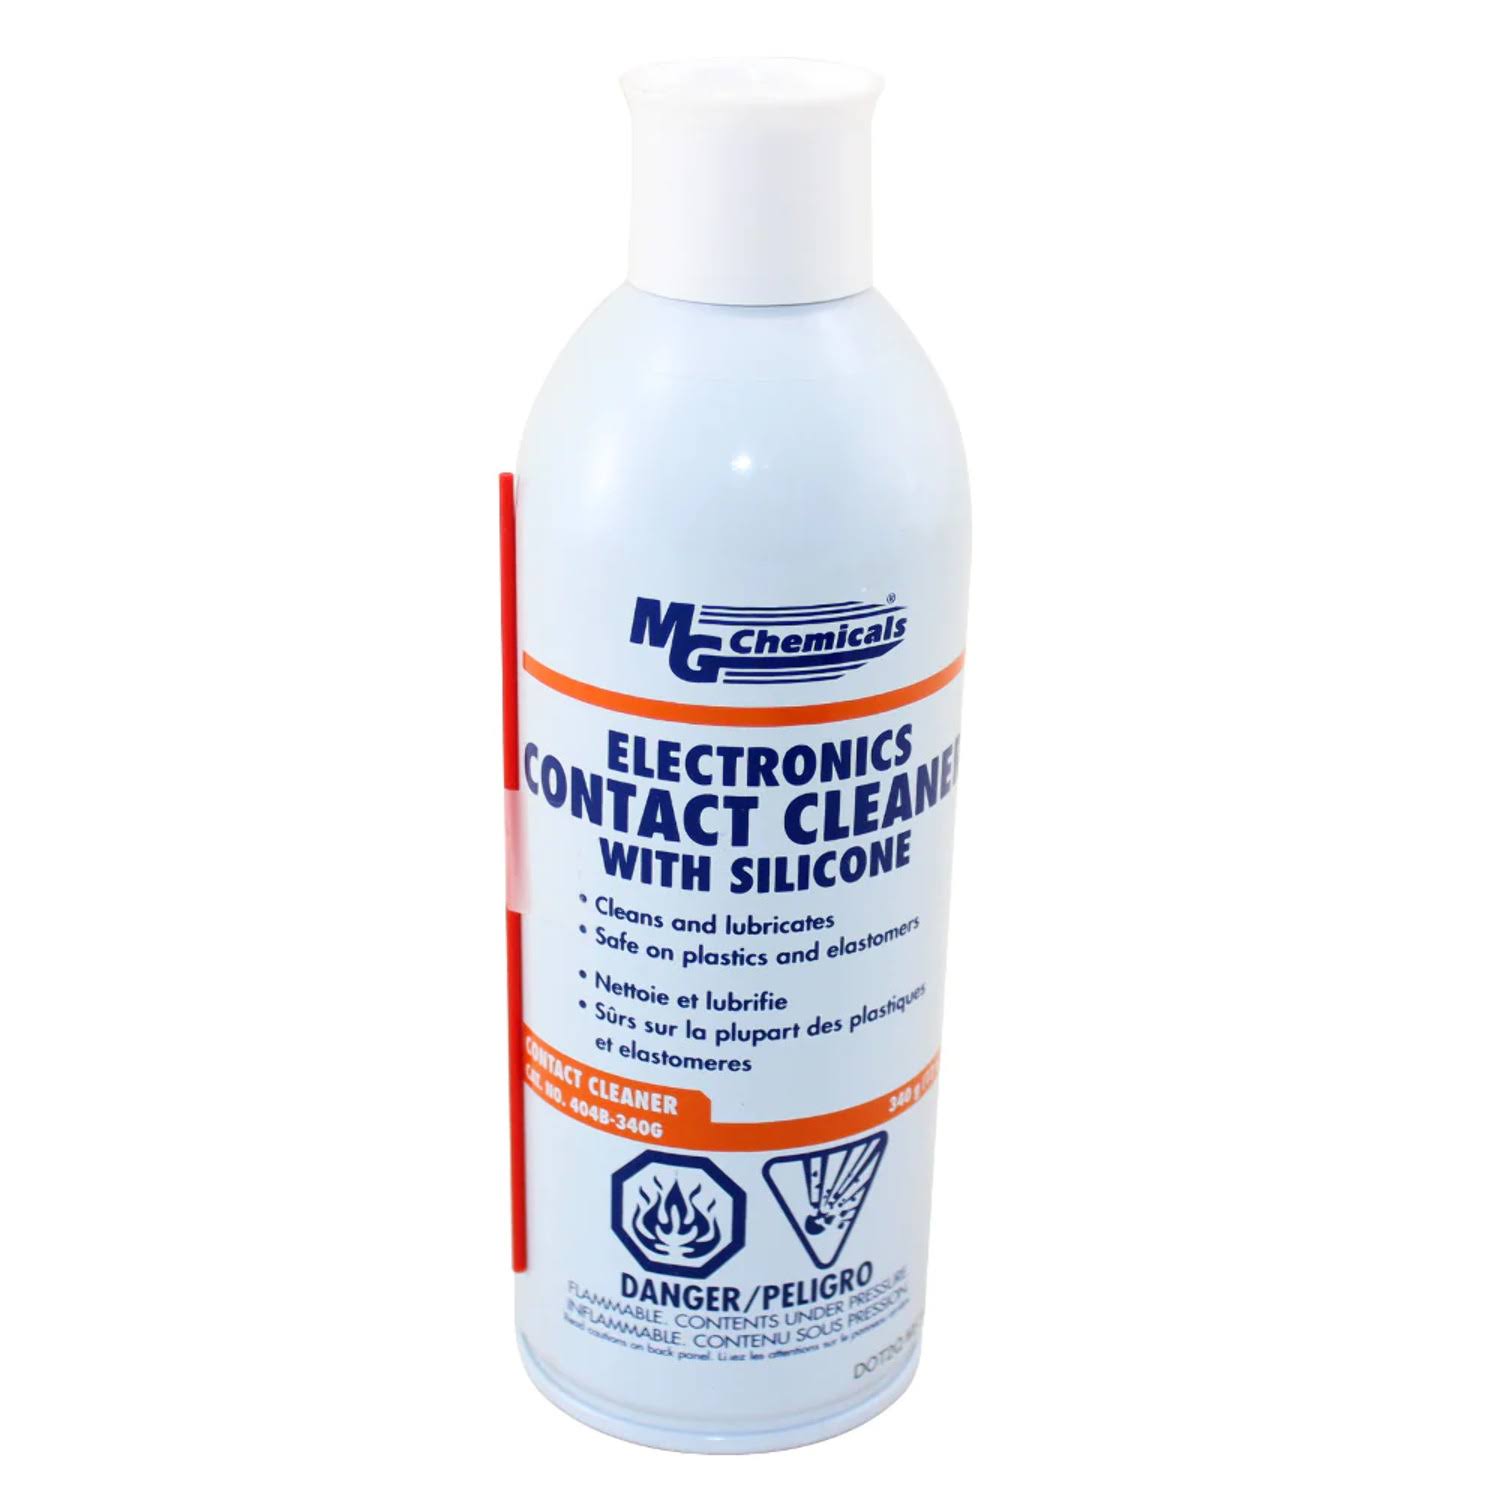 MG Chemicals Contact Cleaner with Electronic Grade Silicones - 340g